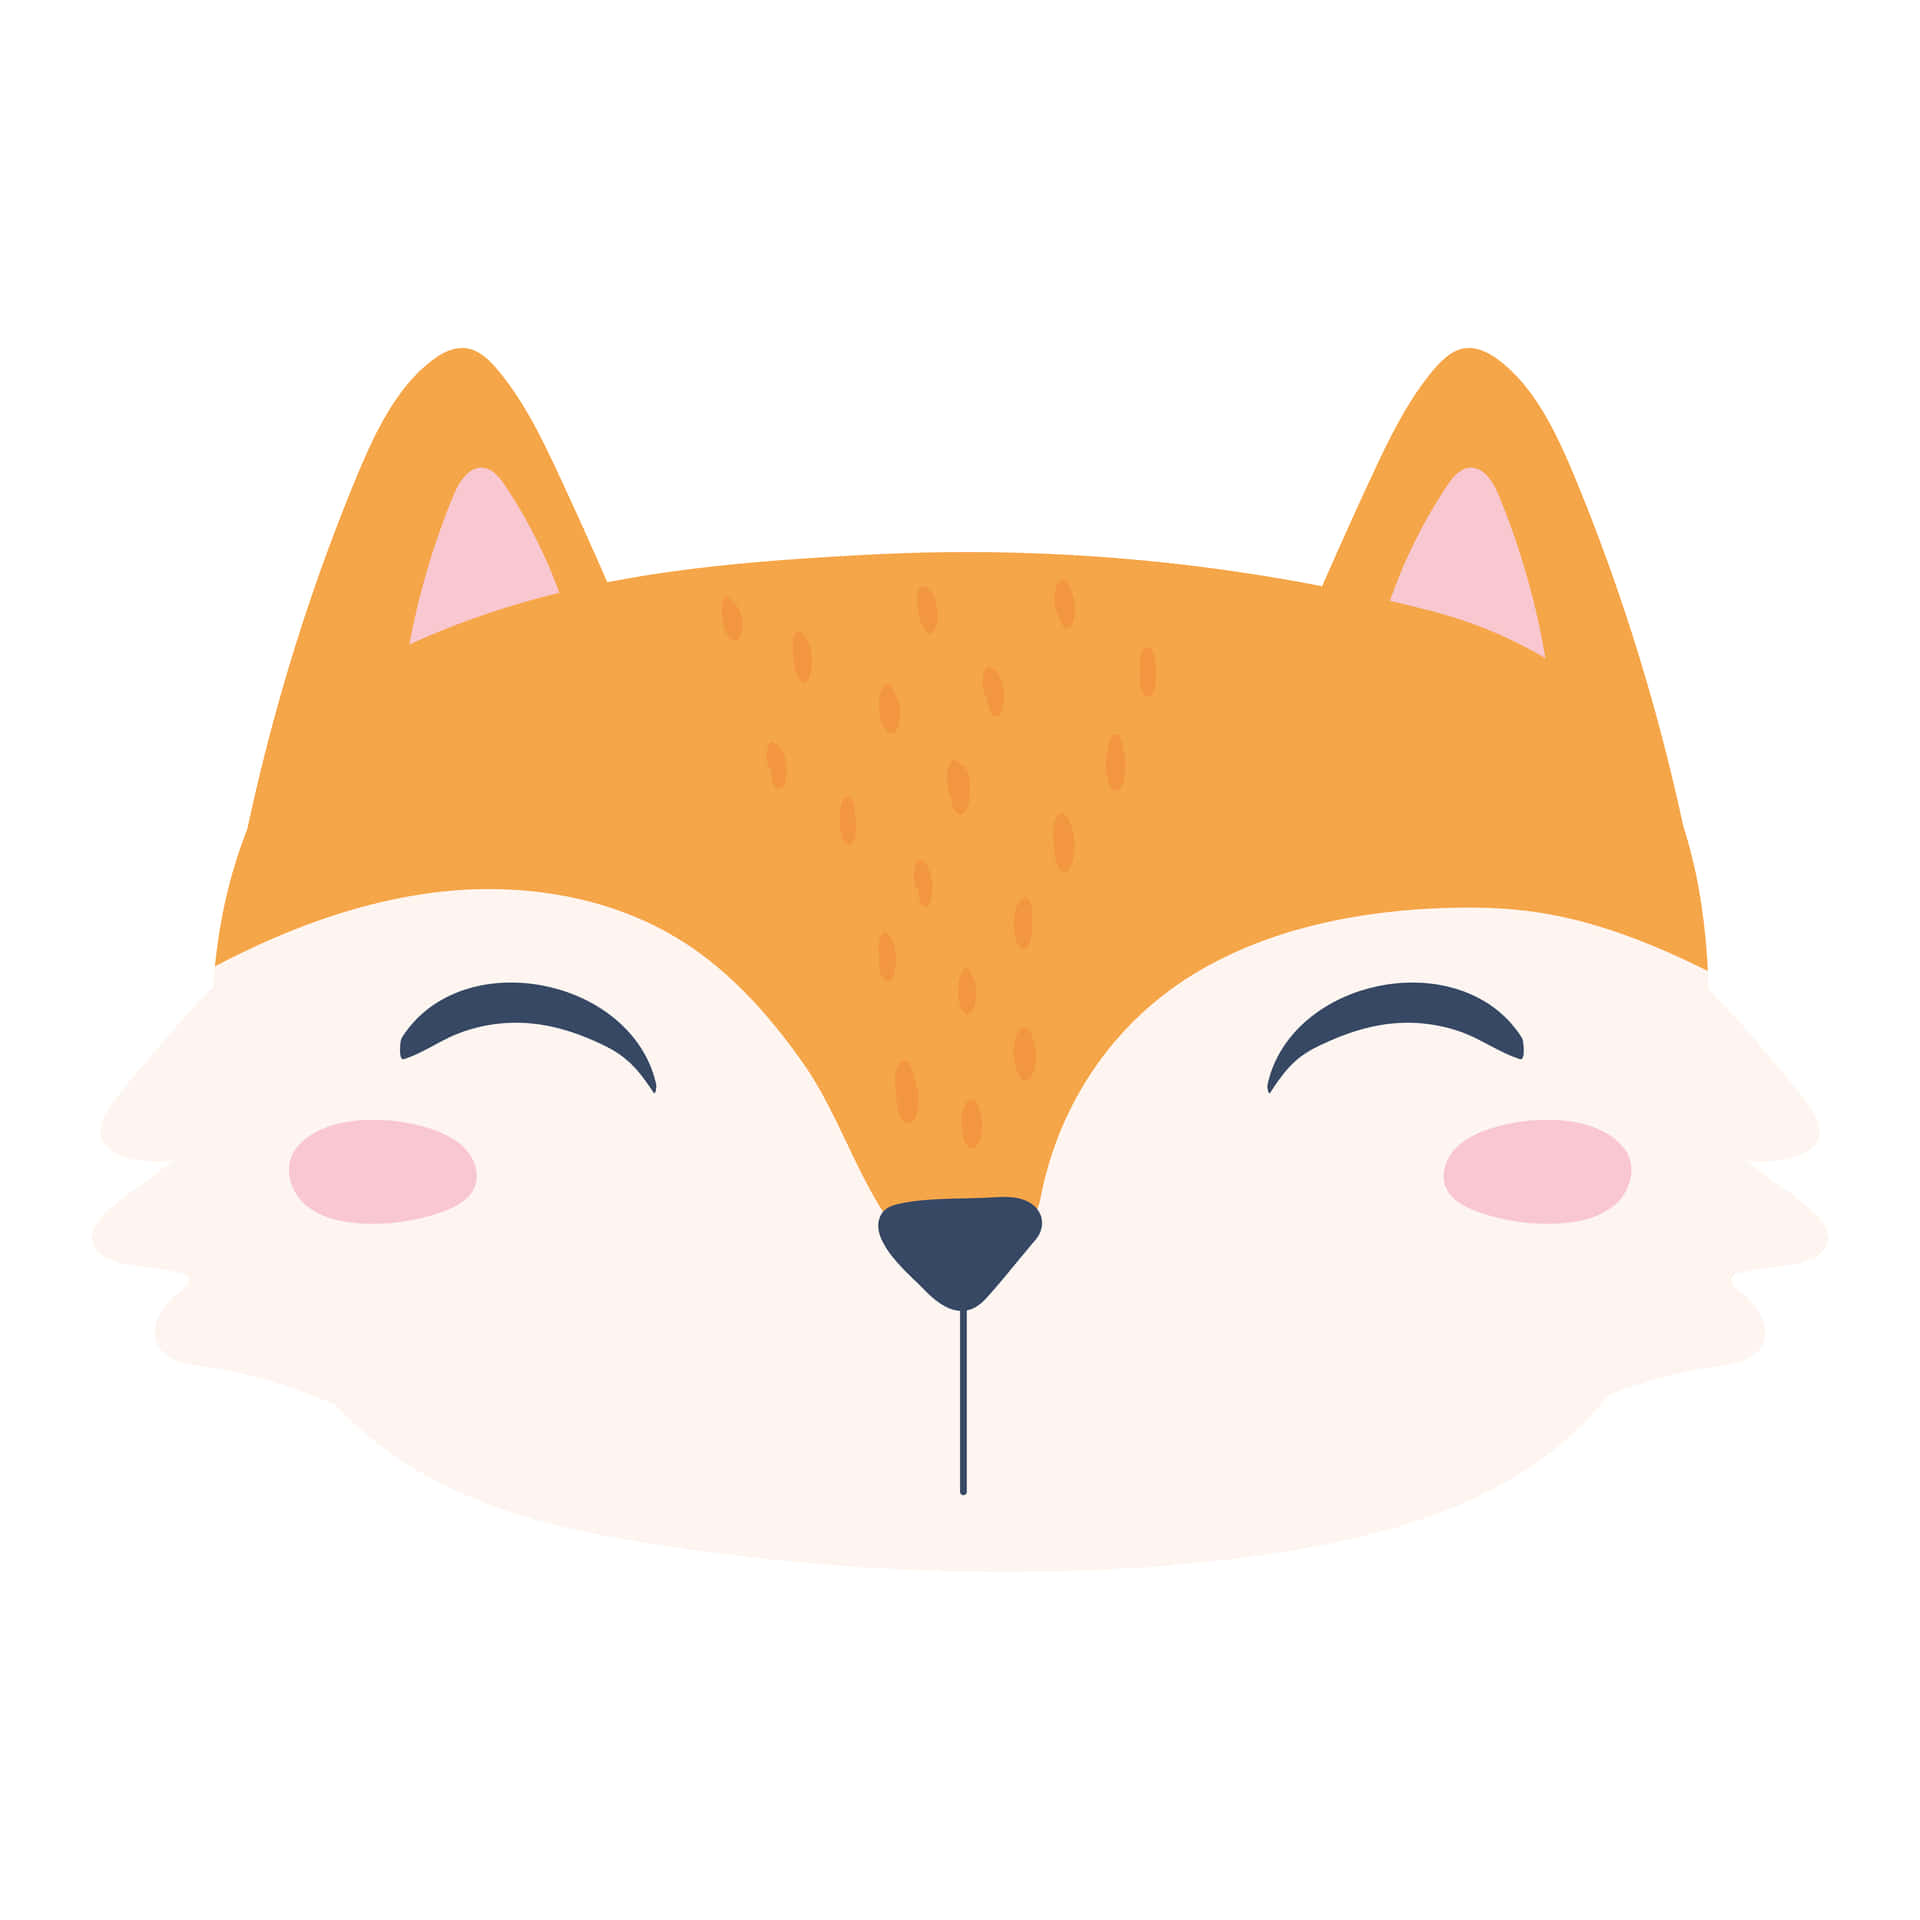 Look at this Adorable Fox!